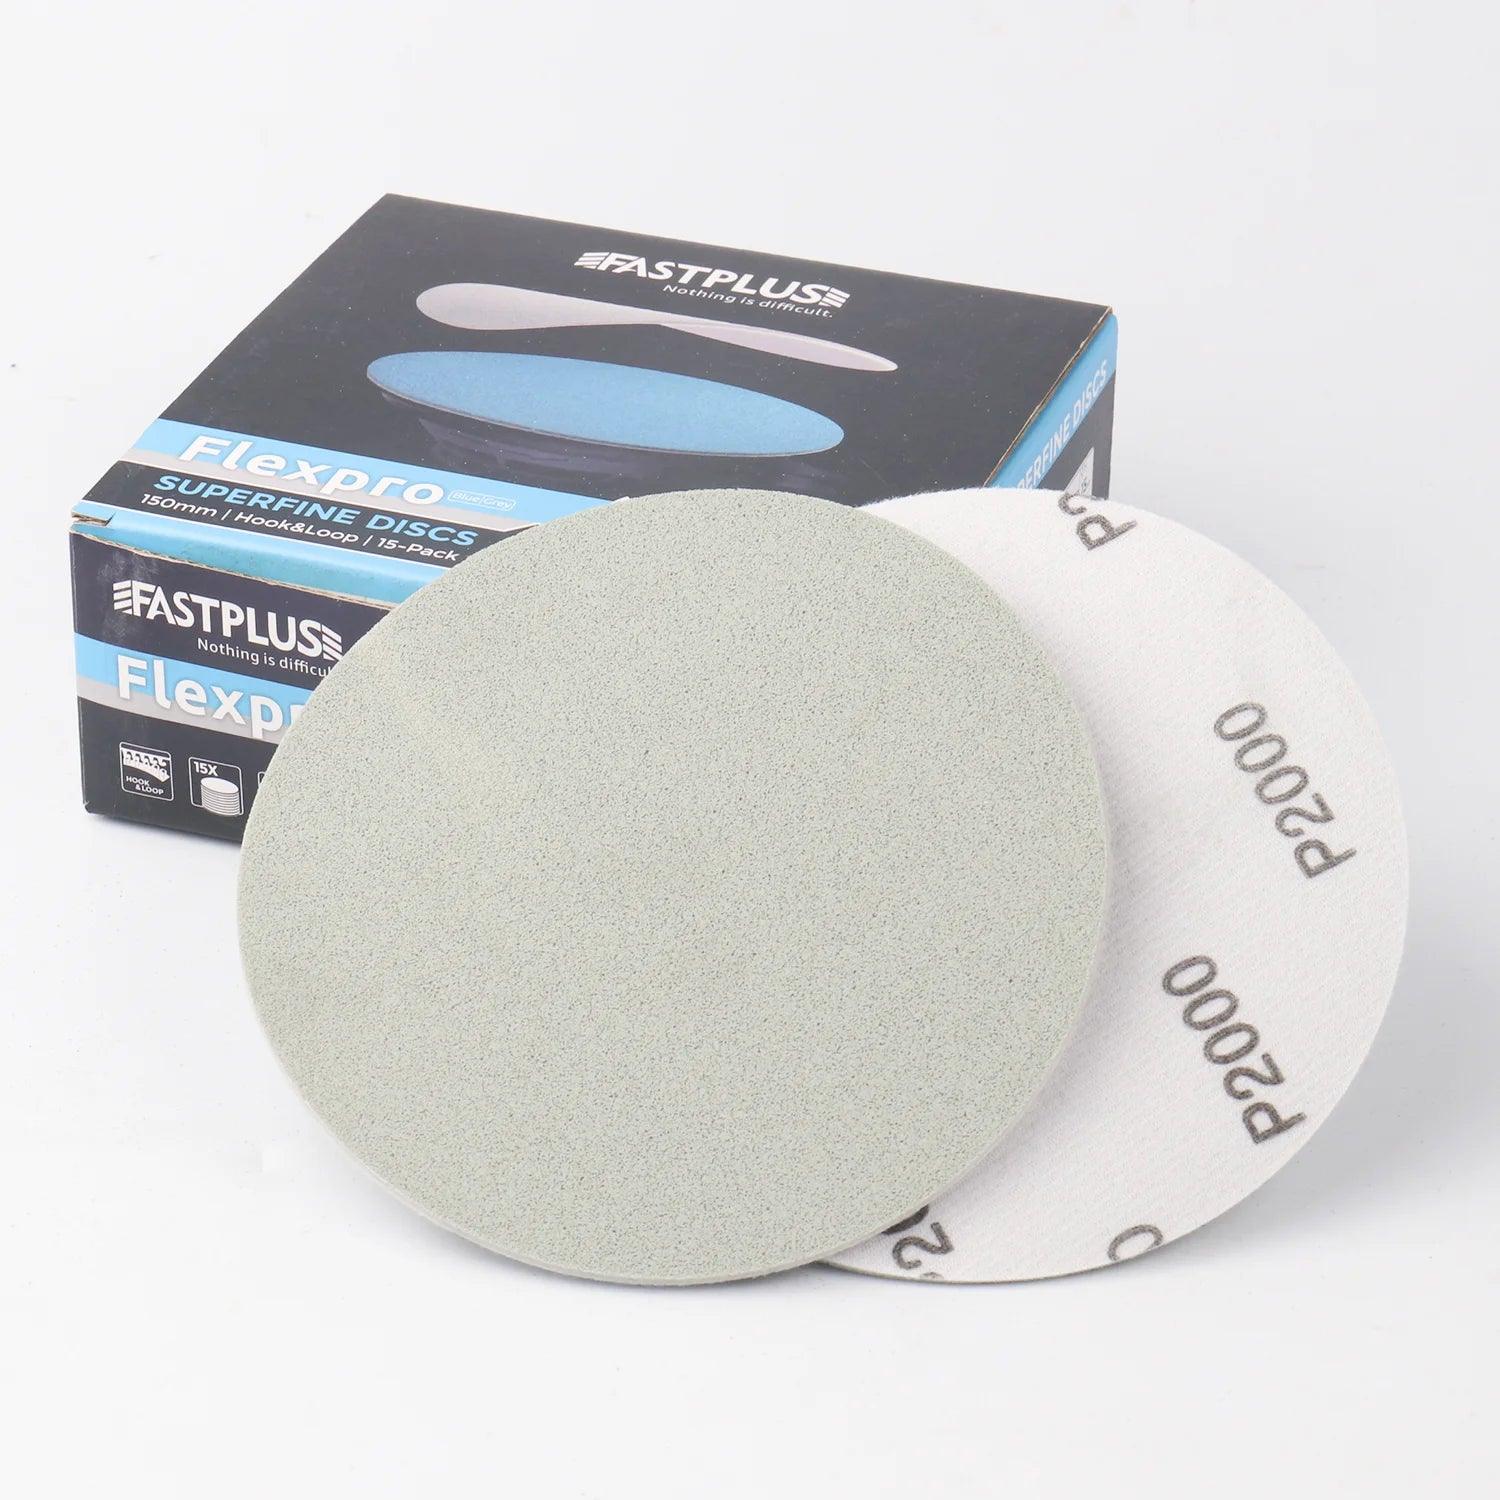 Flexpro Trizact Discs for Fine Finishing and Car Detailing by Fastplus